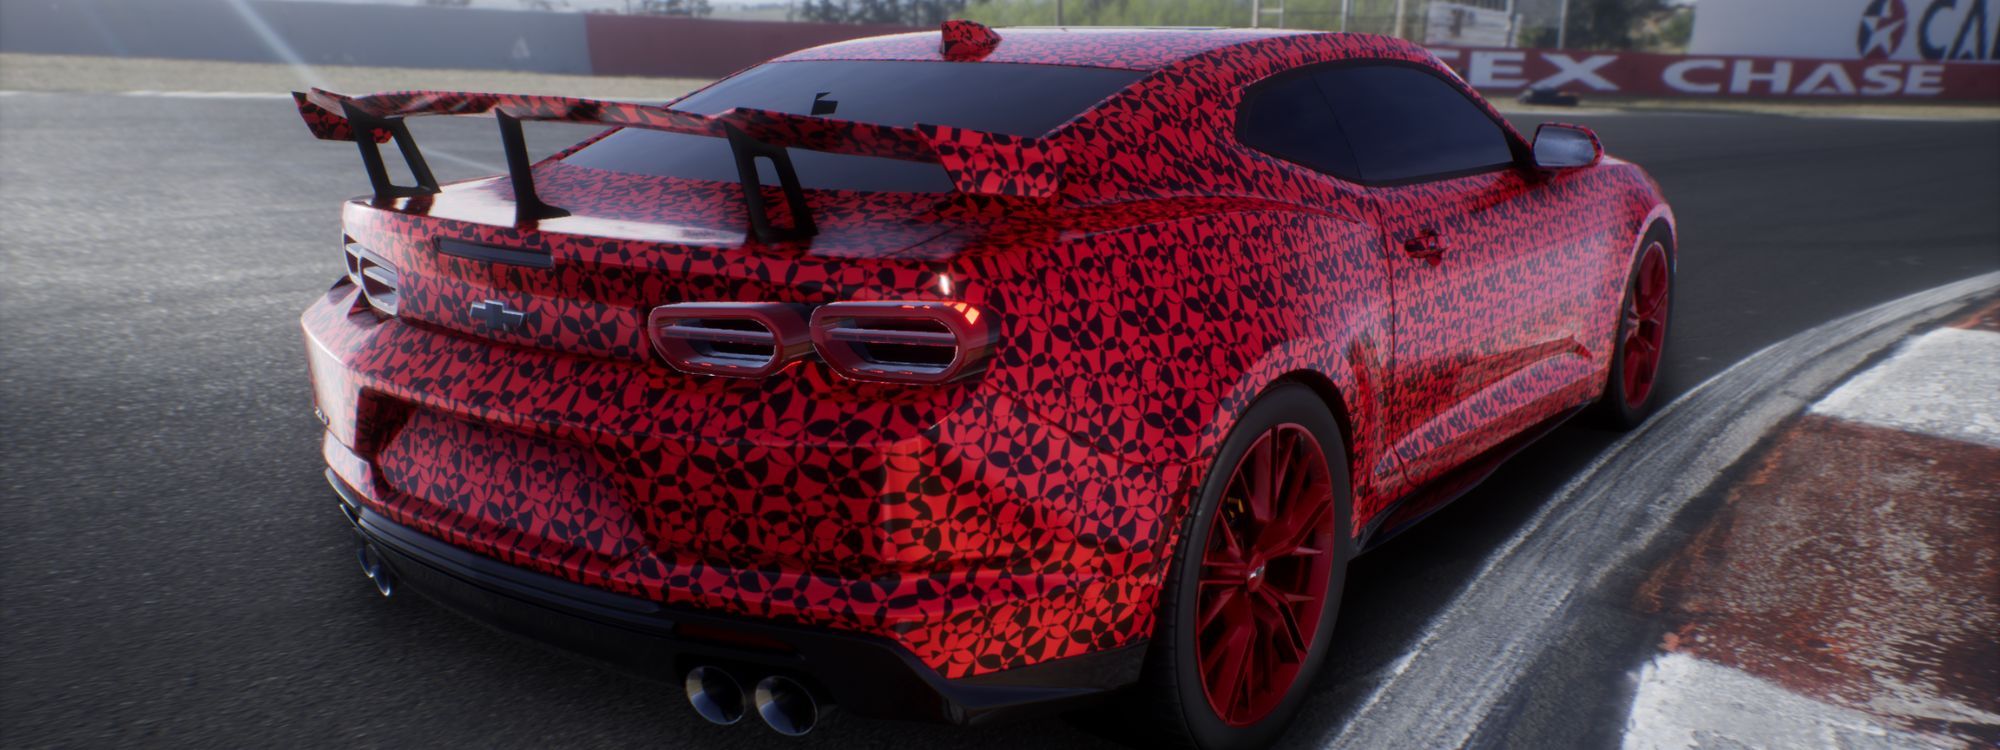 Red Abstract Geometric Wrap Films